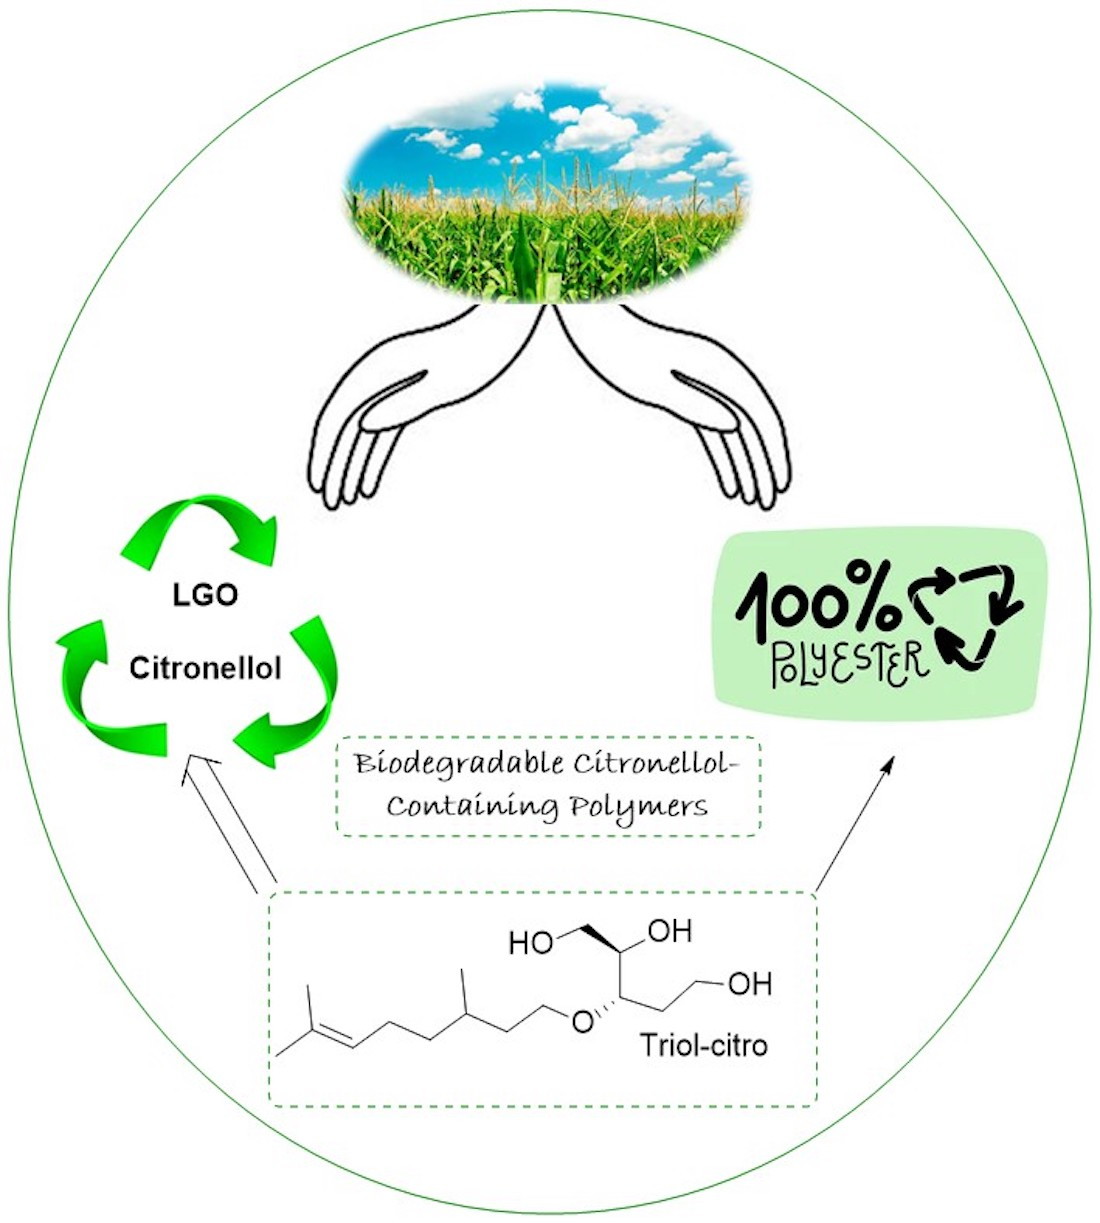 Unprecedented Biodegradable Cellulose-Derived Polyesters with Pendant Citronellol Moieties: From Monomer Synthesis to Enzymatic Degradation